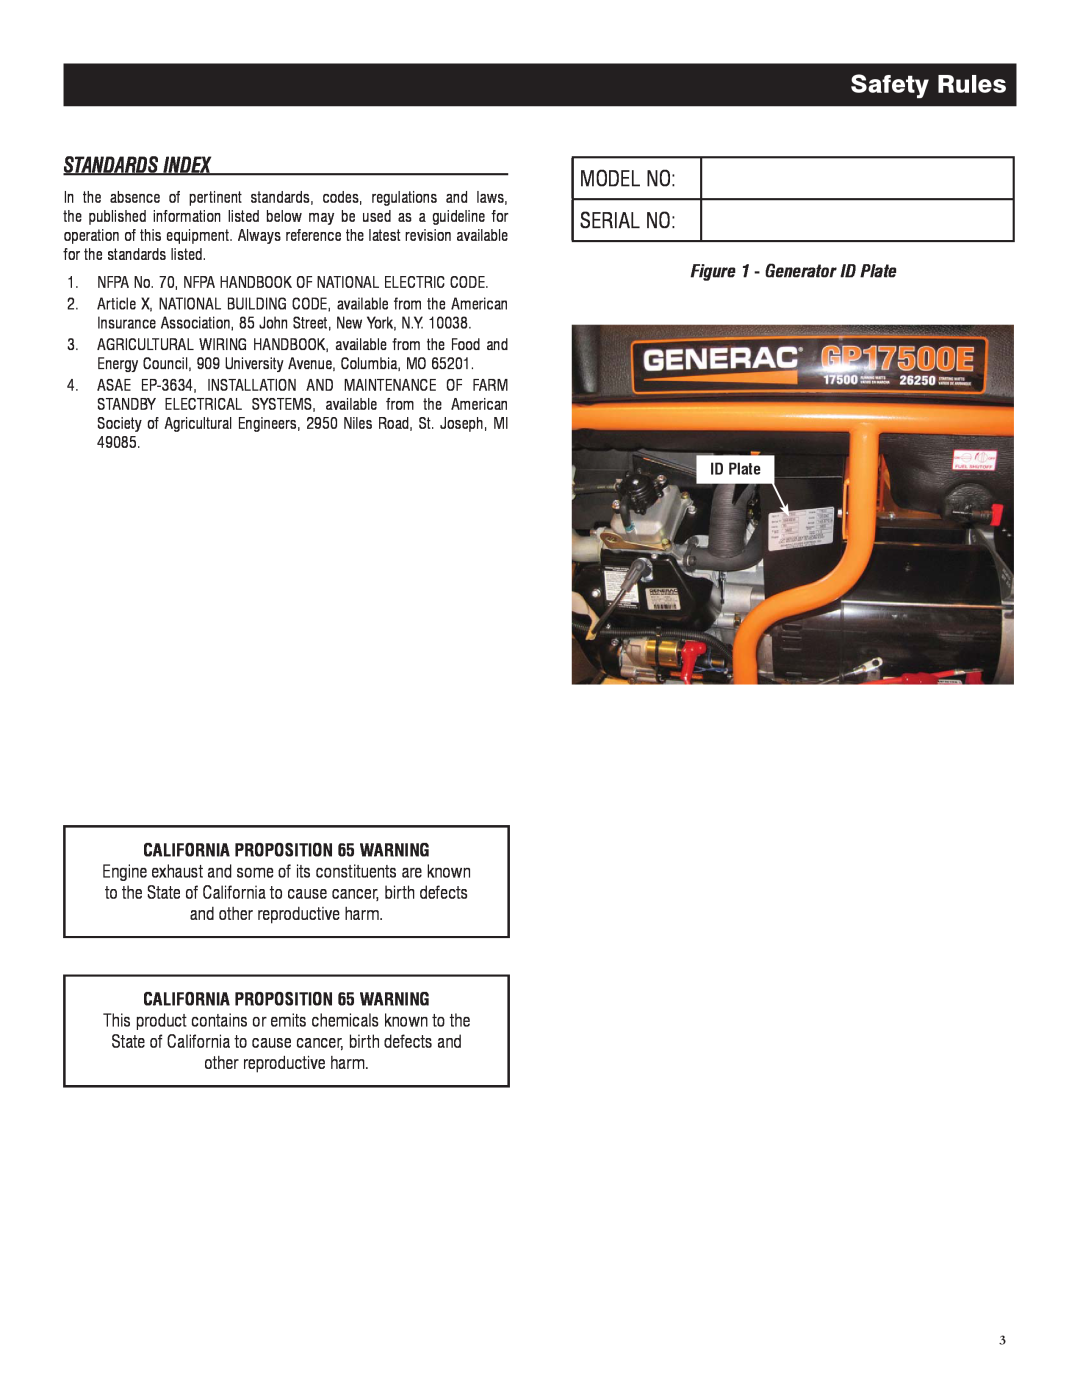 Generac 005735-0 Standards Index, Model No Serial No, Safety Rules, CALIFORNIA PROPOSITION 65 WARNING, Generator ID Plate 